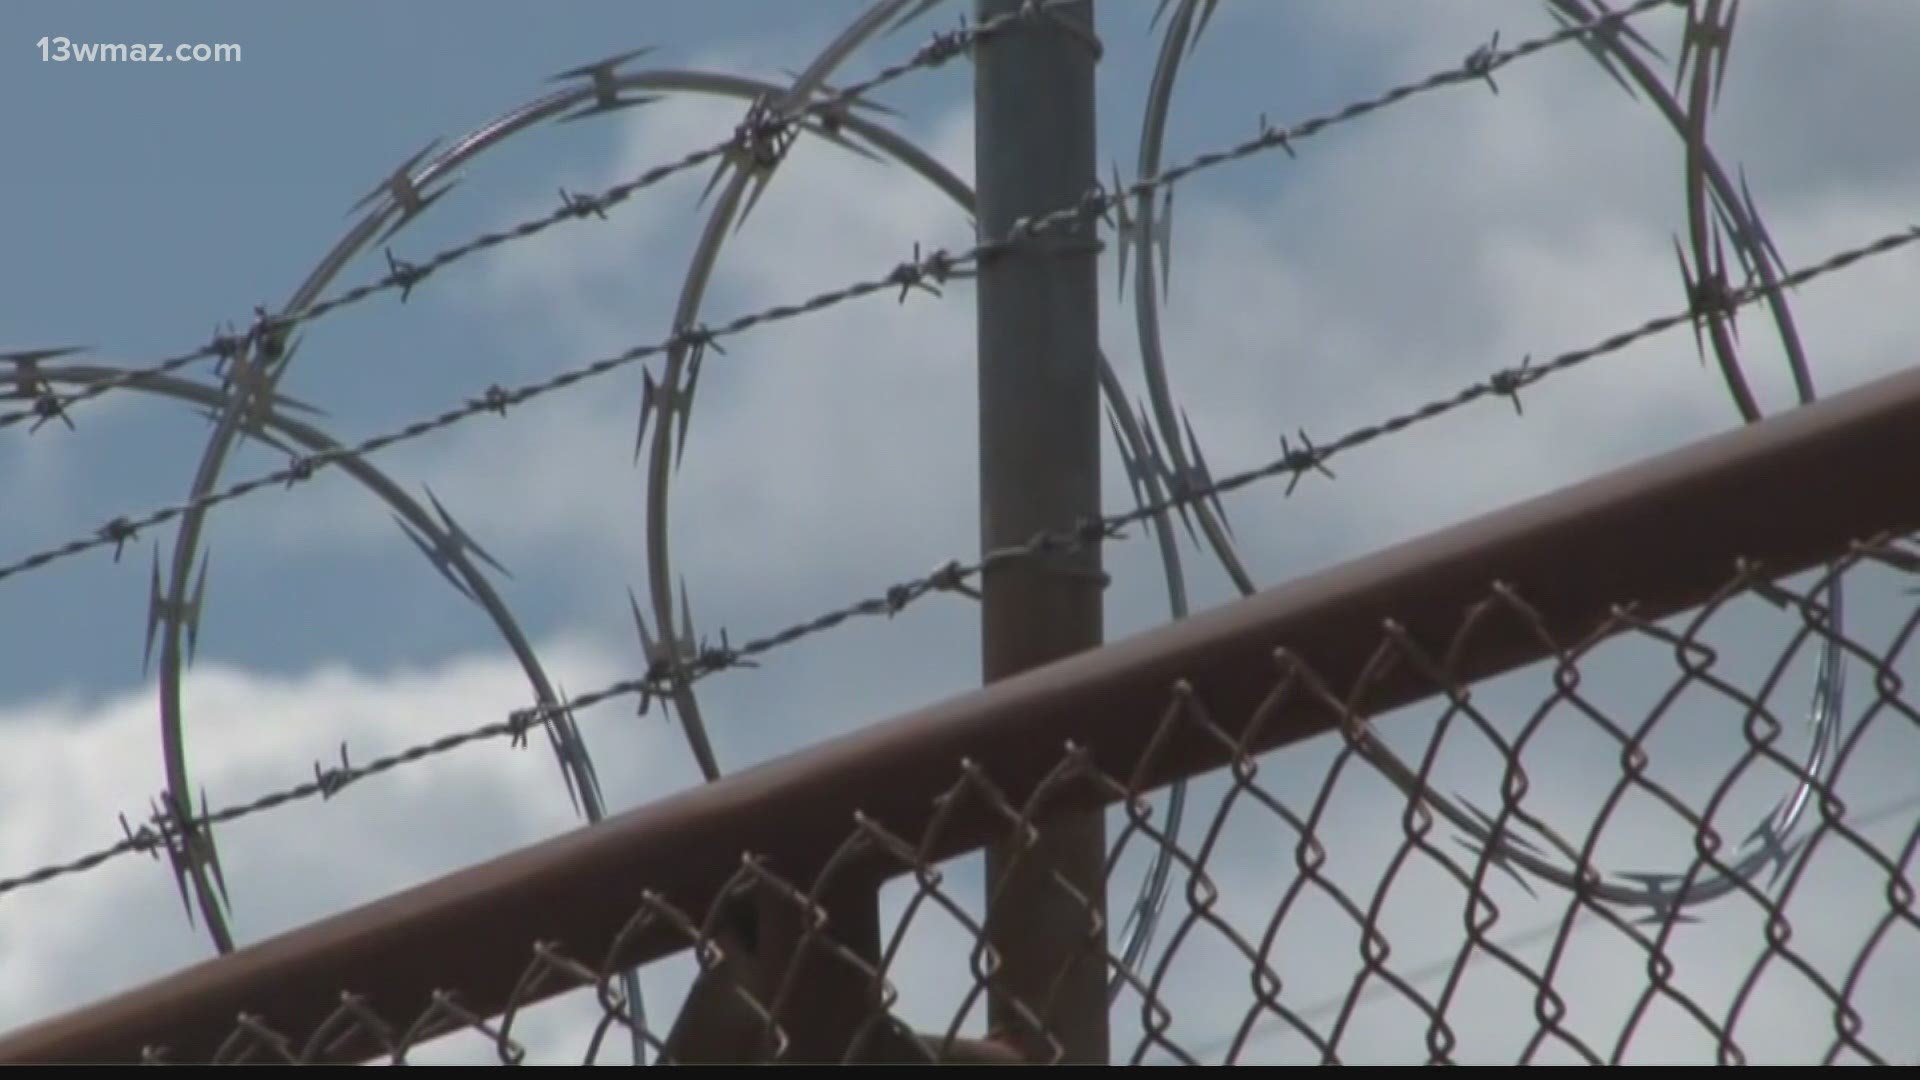 Mayor Lester Miller announced Monday afternoon that he plans to put $3 million into fixing the locks at the Bibb County jail, if the county commission approves it.